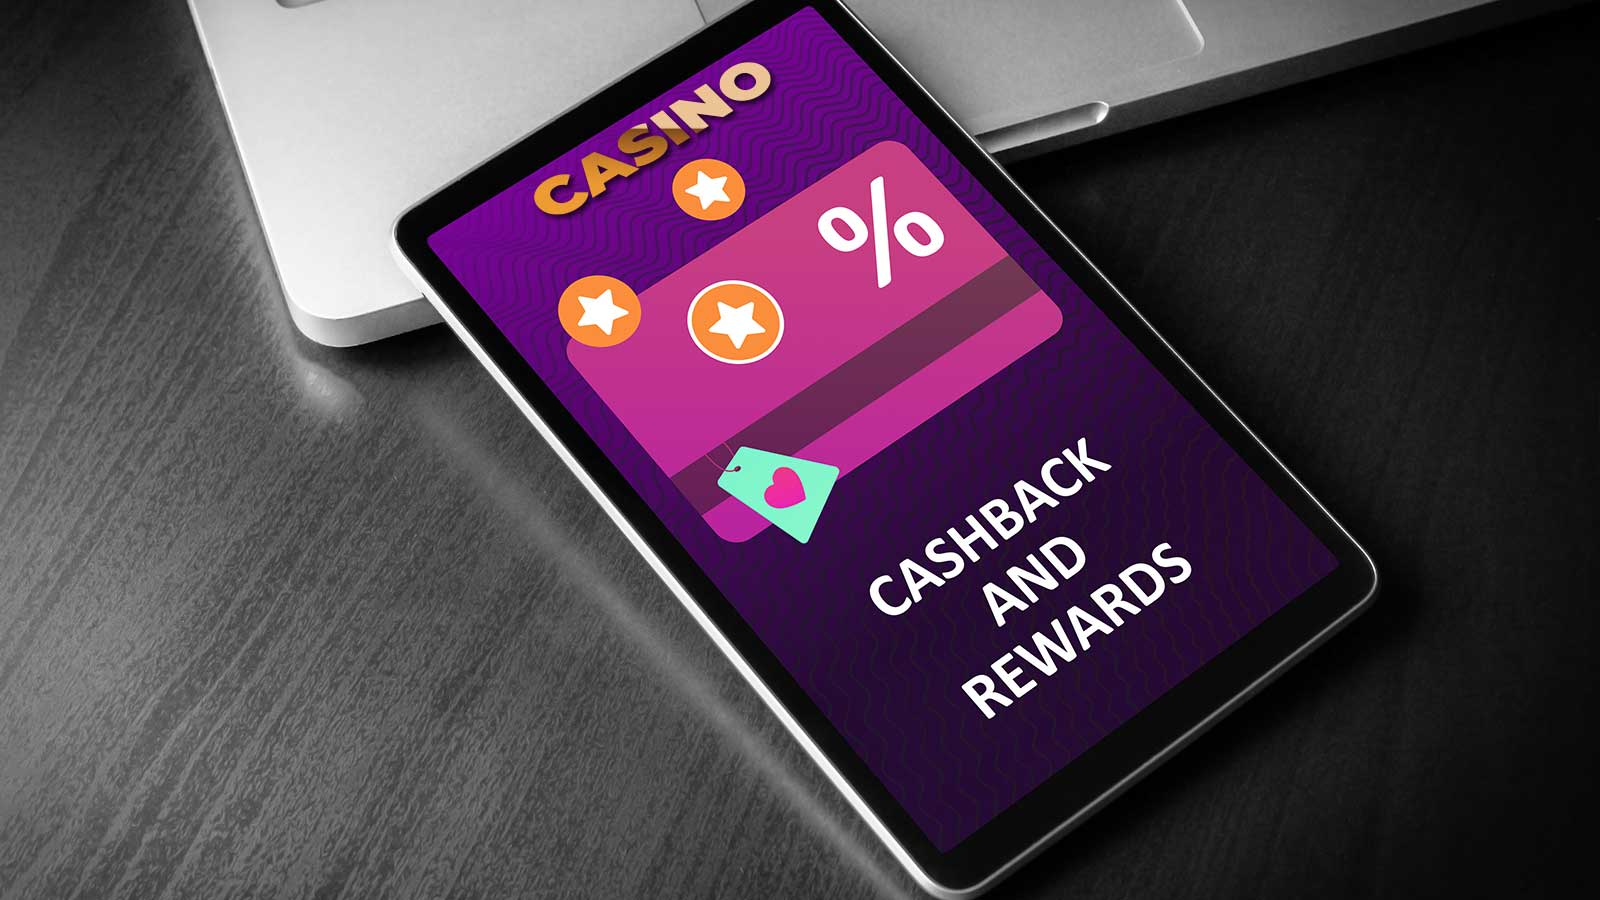 What do you get from an online casino’s loyalty program